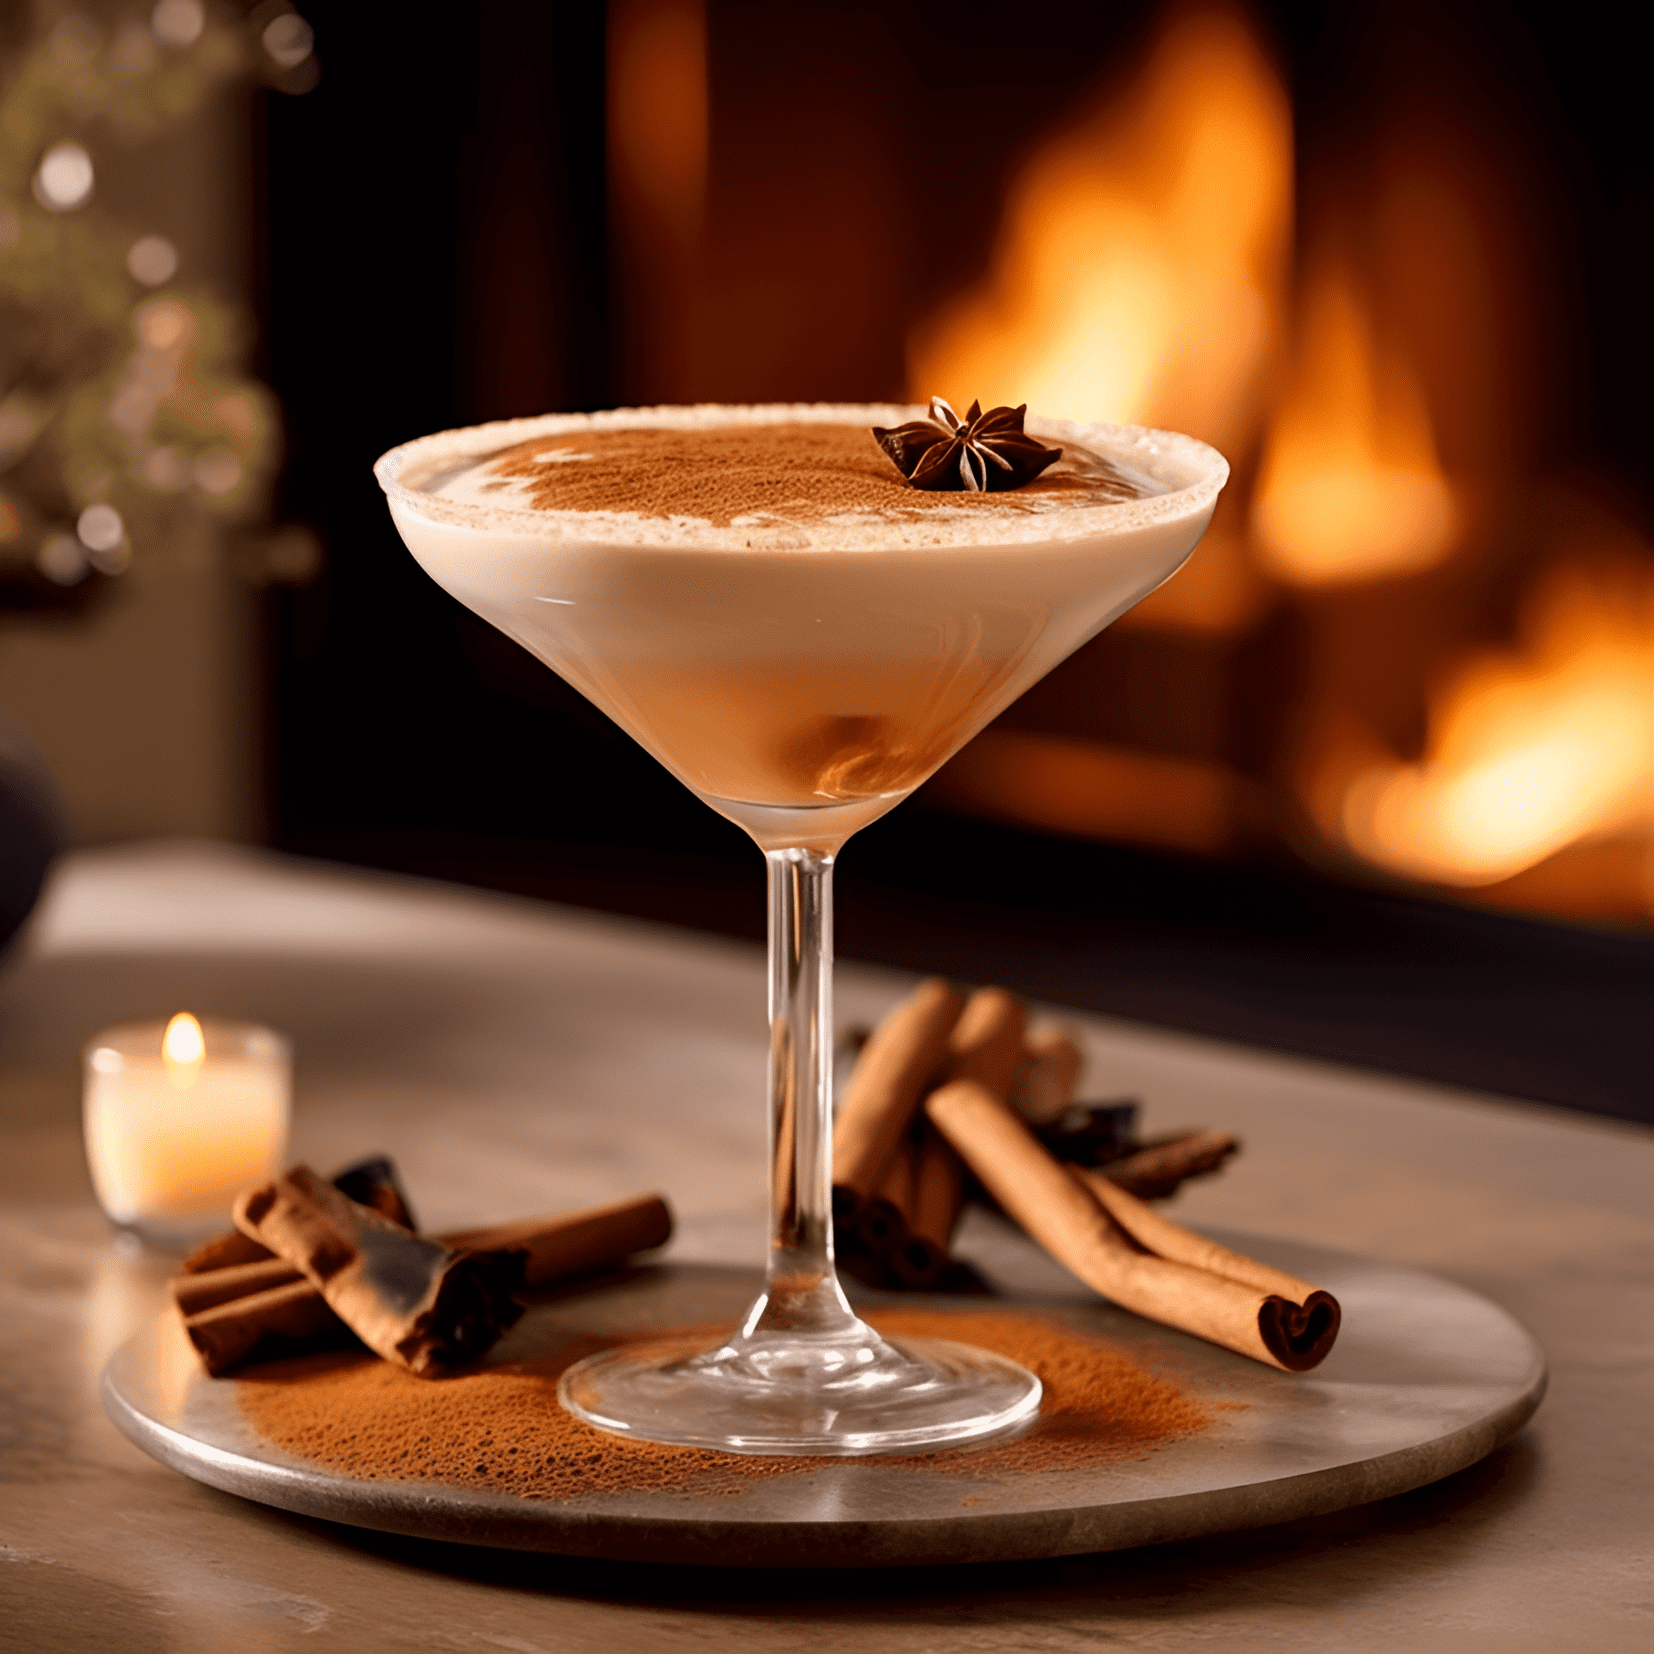 The Cinnamon Toast cocktail is a delightful mix of sweet, creamy, and spicy flavors. The cinnamon adds a warm and comforting taste, while the cream liqueur provides a rich and velvety texture. The overall flavor is well-balanced and not too overpowering.